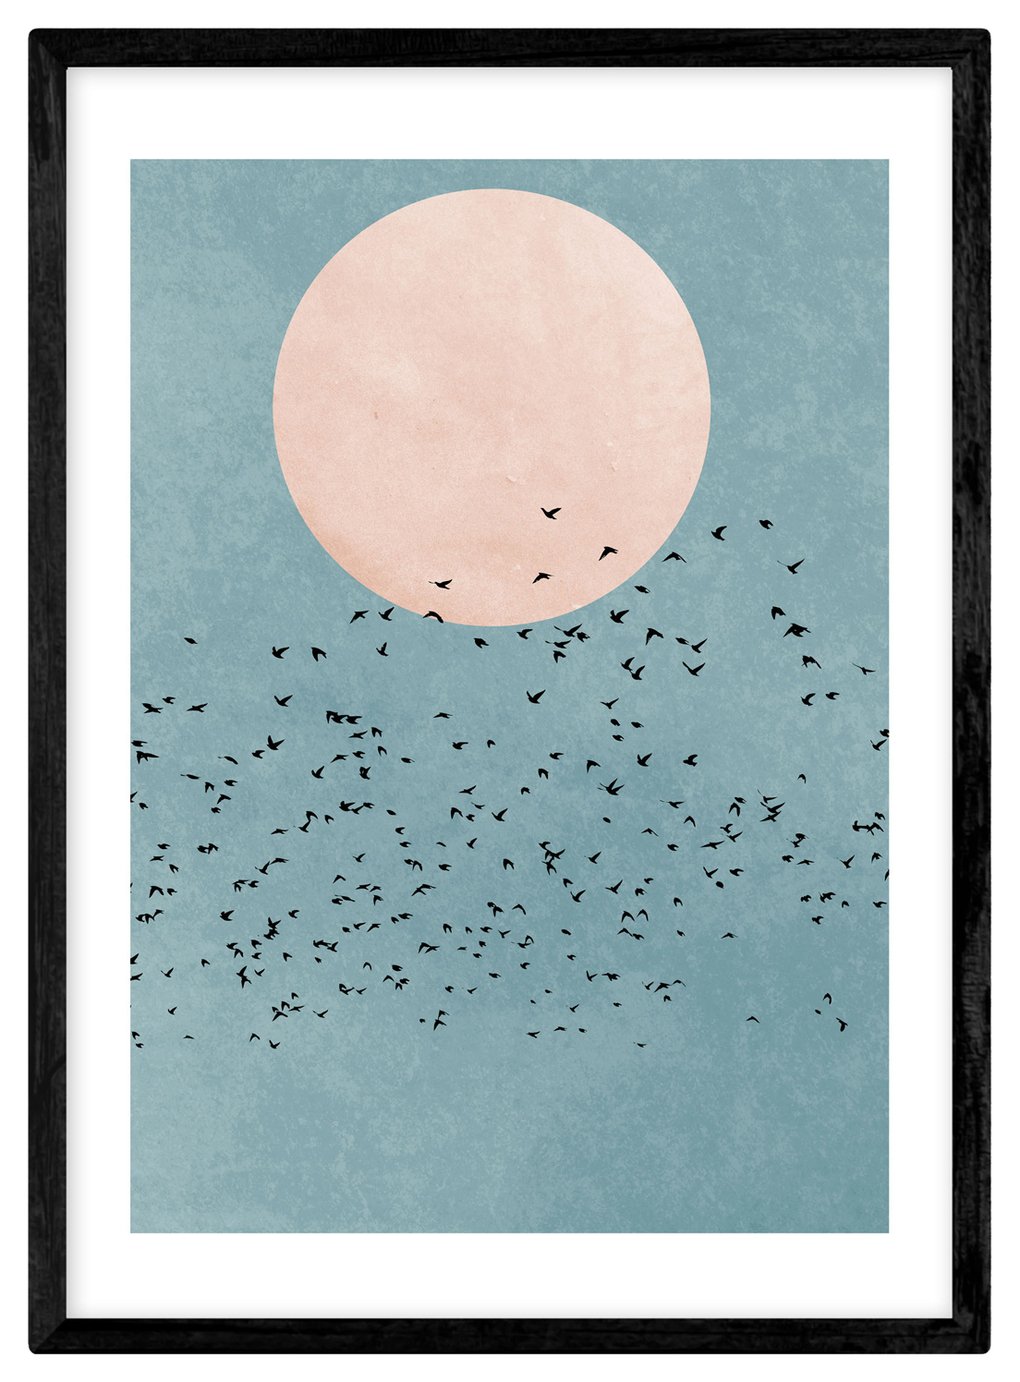 East End Prints Fly Away Framed Print - A2